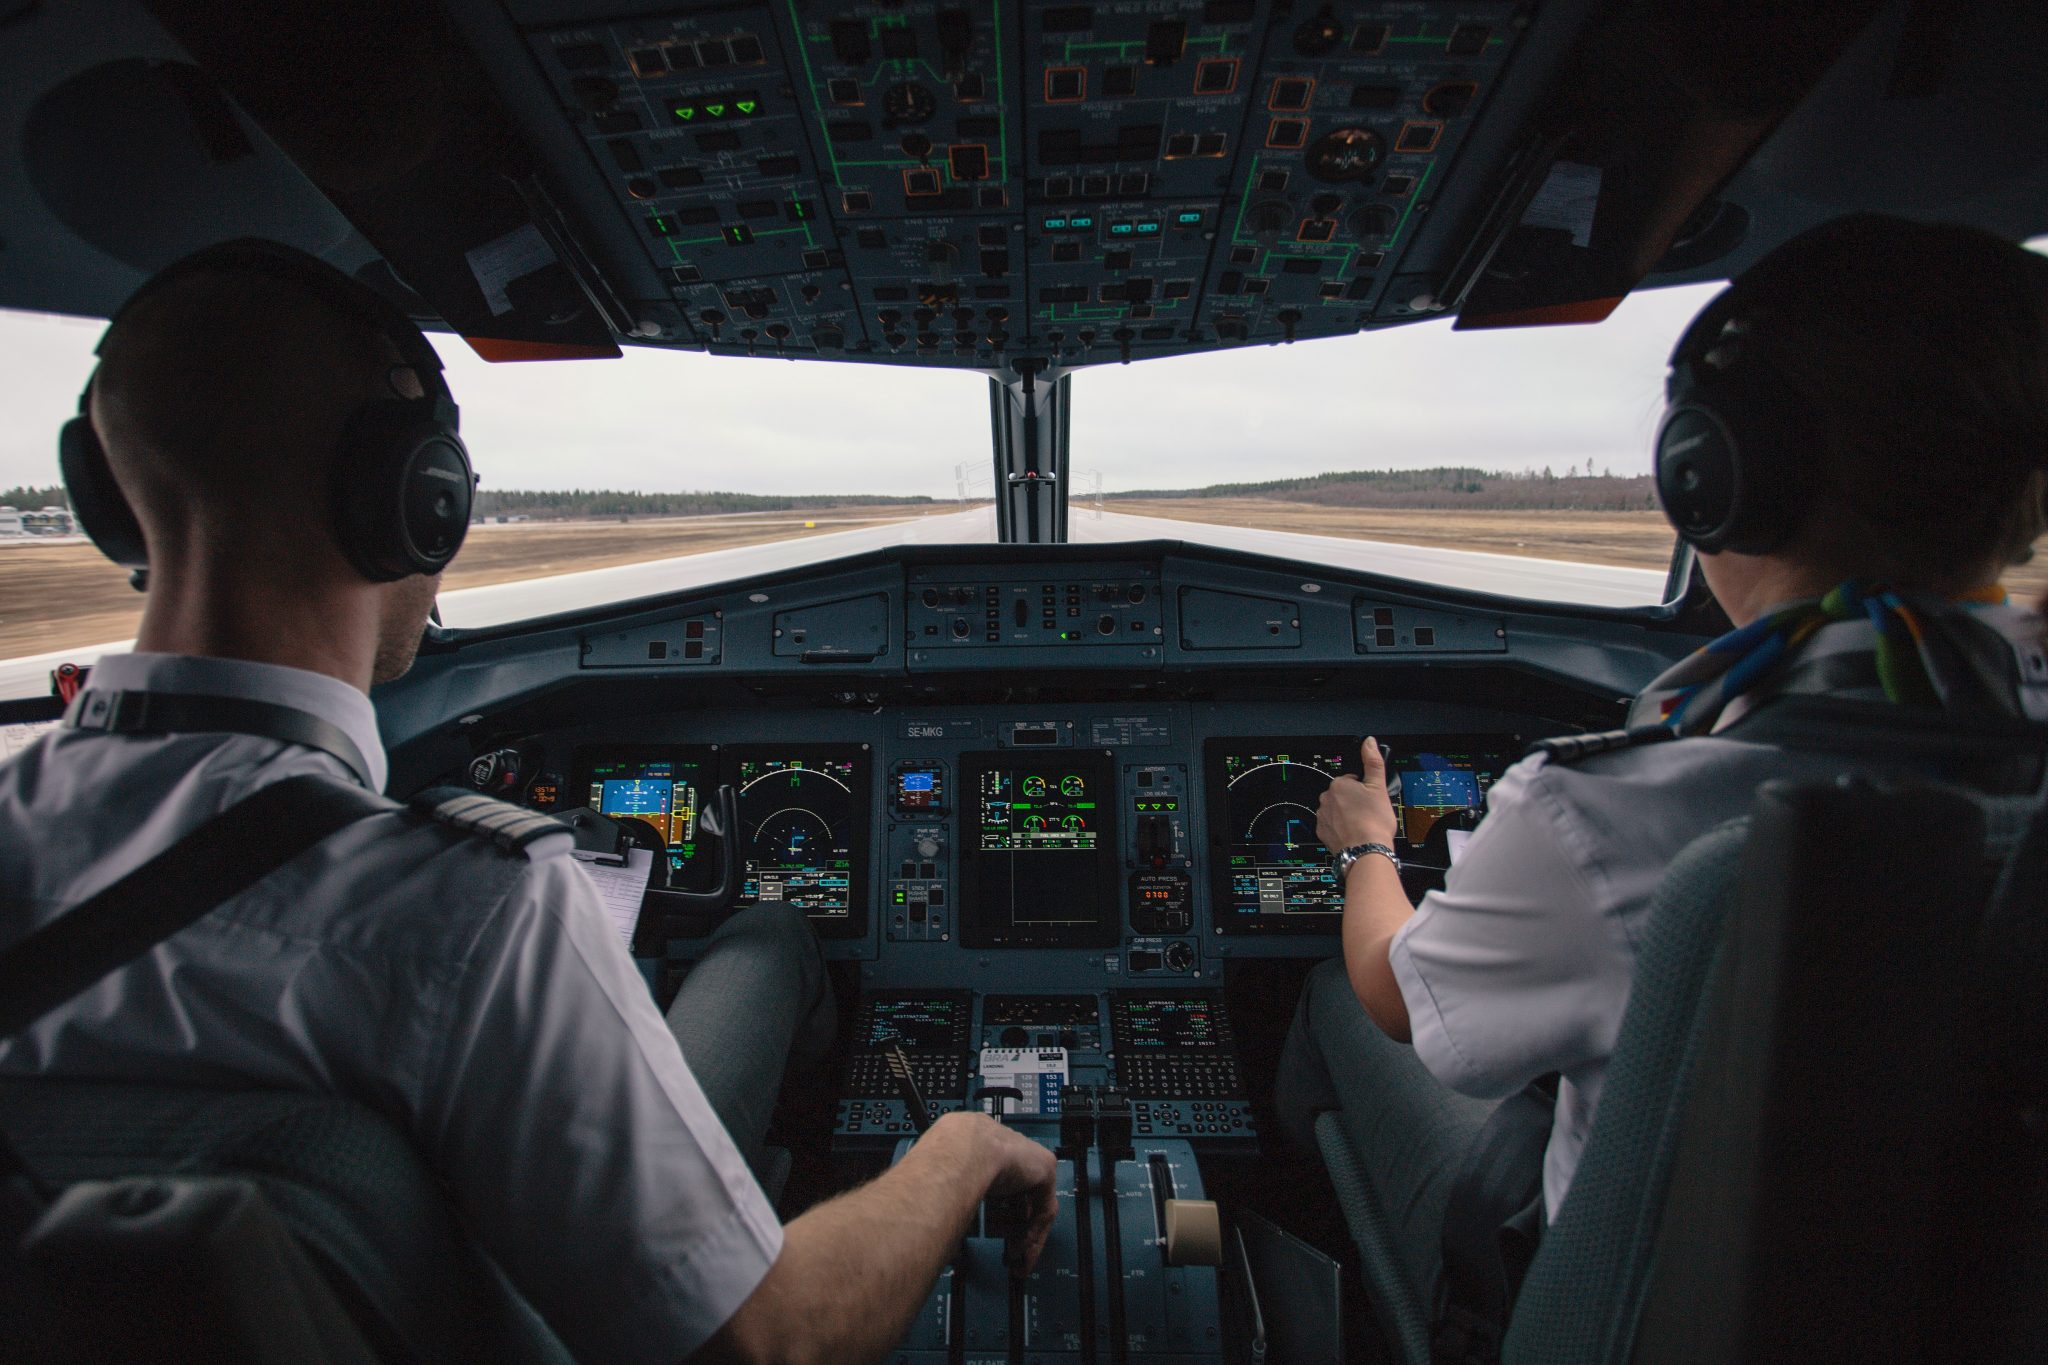 Two pilots sit in a cockpit on the runway preparing for flight.